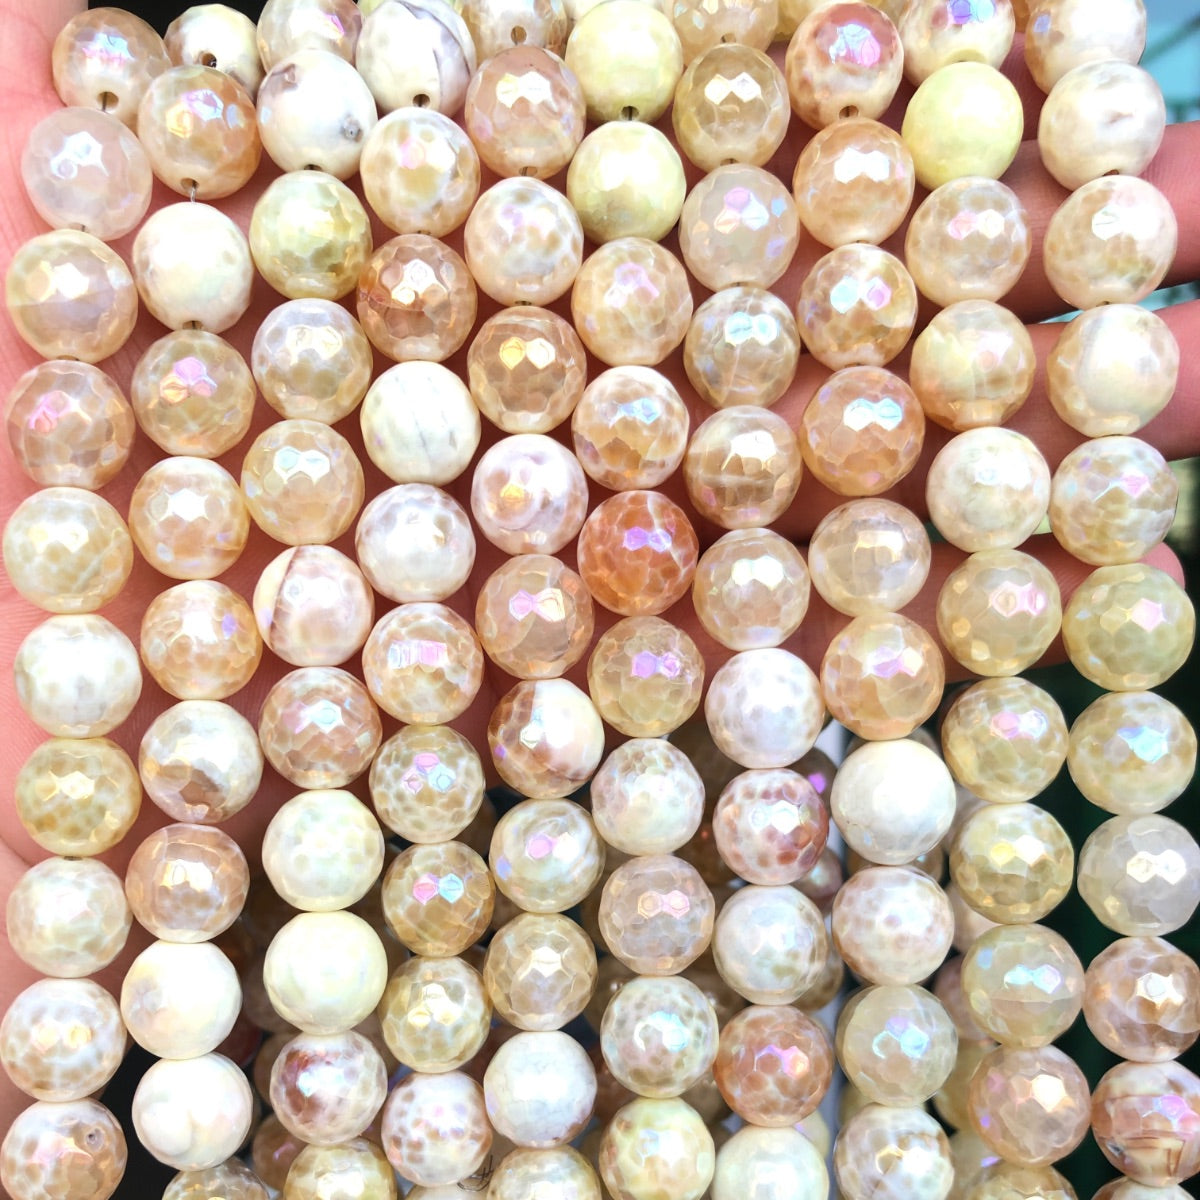 2 Strands/lot 12mm Electroplated AB Yellow Fire Agate Faceted Stone Beads Electroplated Beads 12mm Stone Beads Electroplated Faceted Agate Beads New Beads Arrivals Charms Beads Beyond